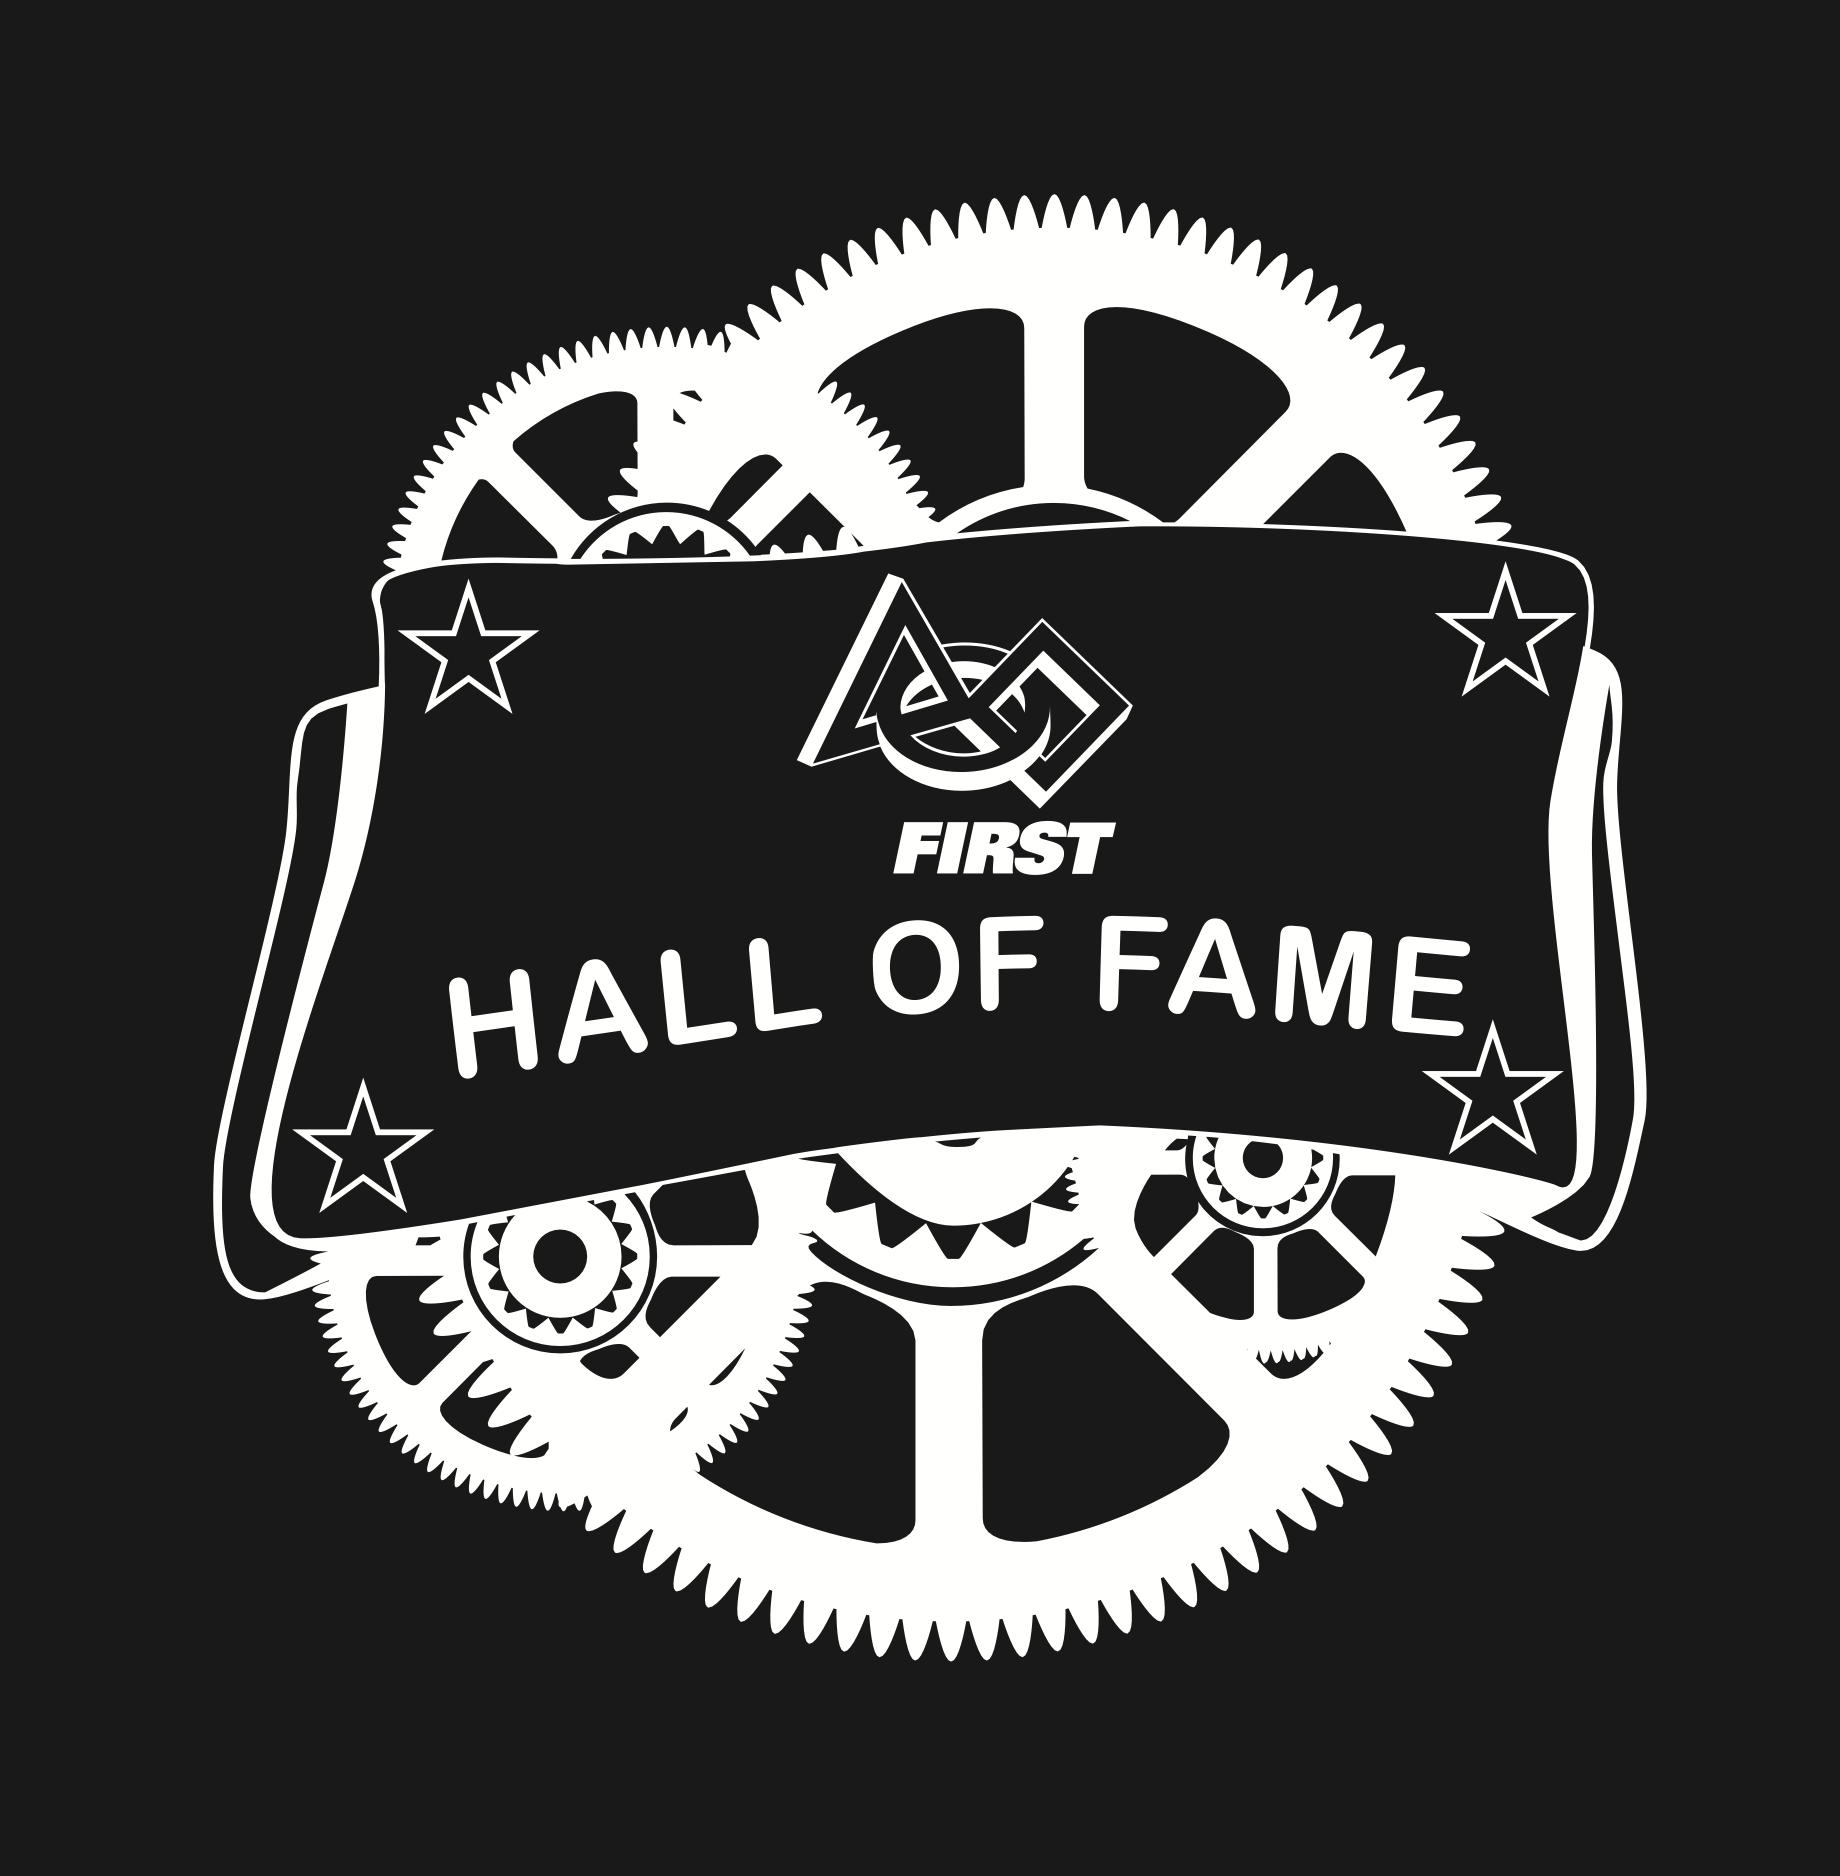 Hall of Fame Chairman's Submission